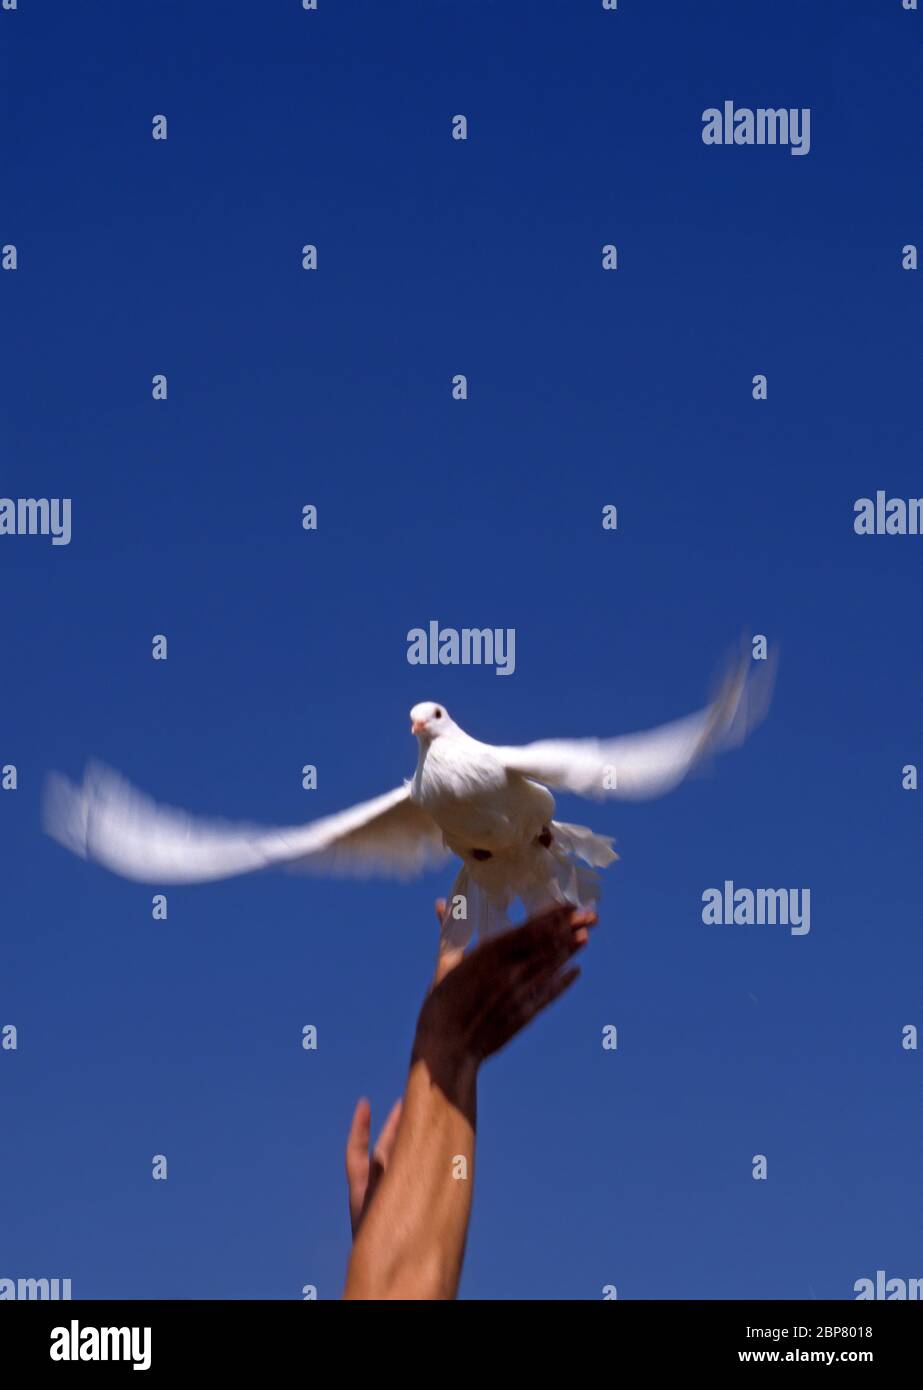 A hand sends off a Flying white dove on blue sky background Stock Photo